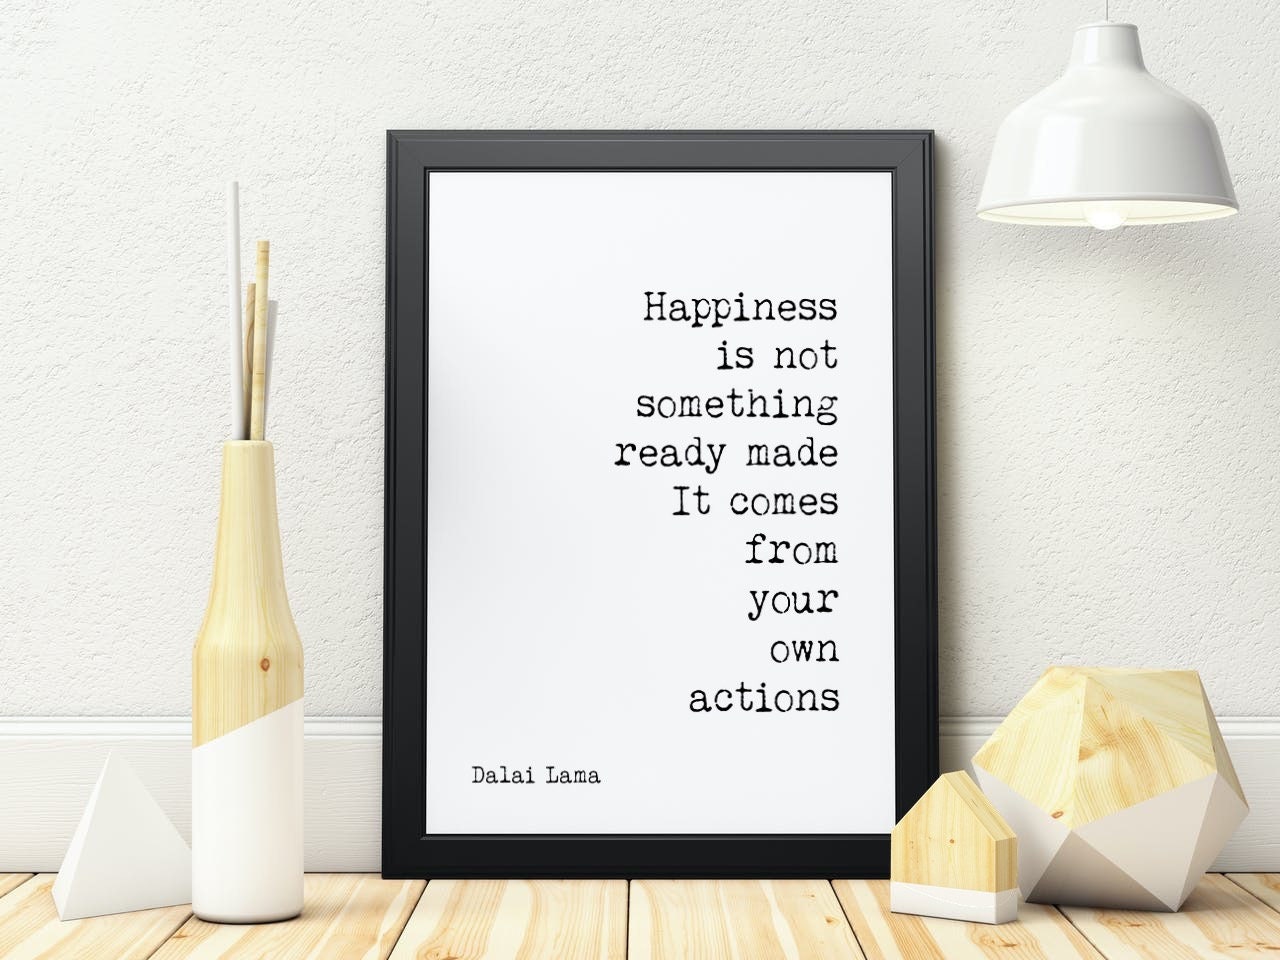 Dalai Lama Happiness Quote Print in Black & White for Living Room or Office Wall Art, Happiness Is Not Ready Made